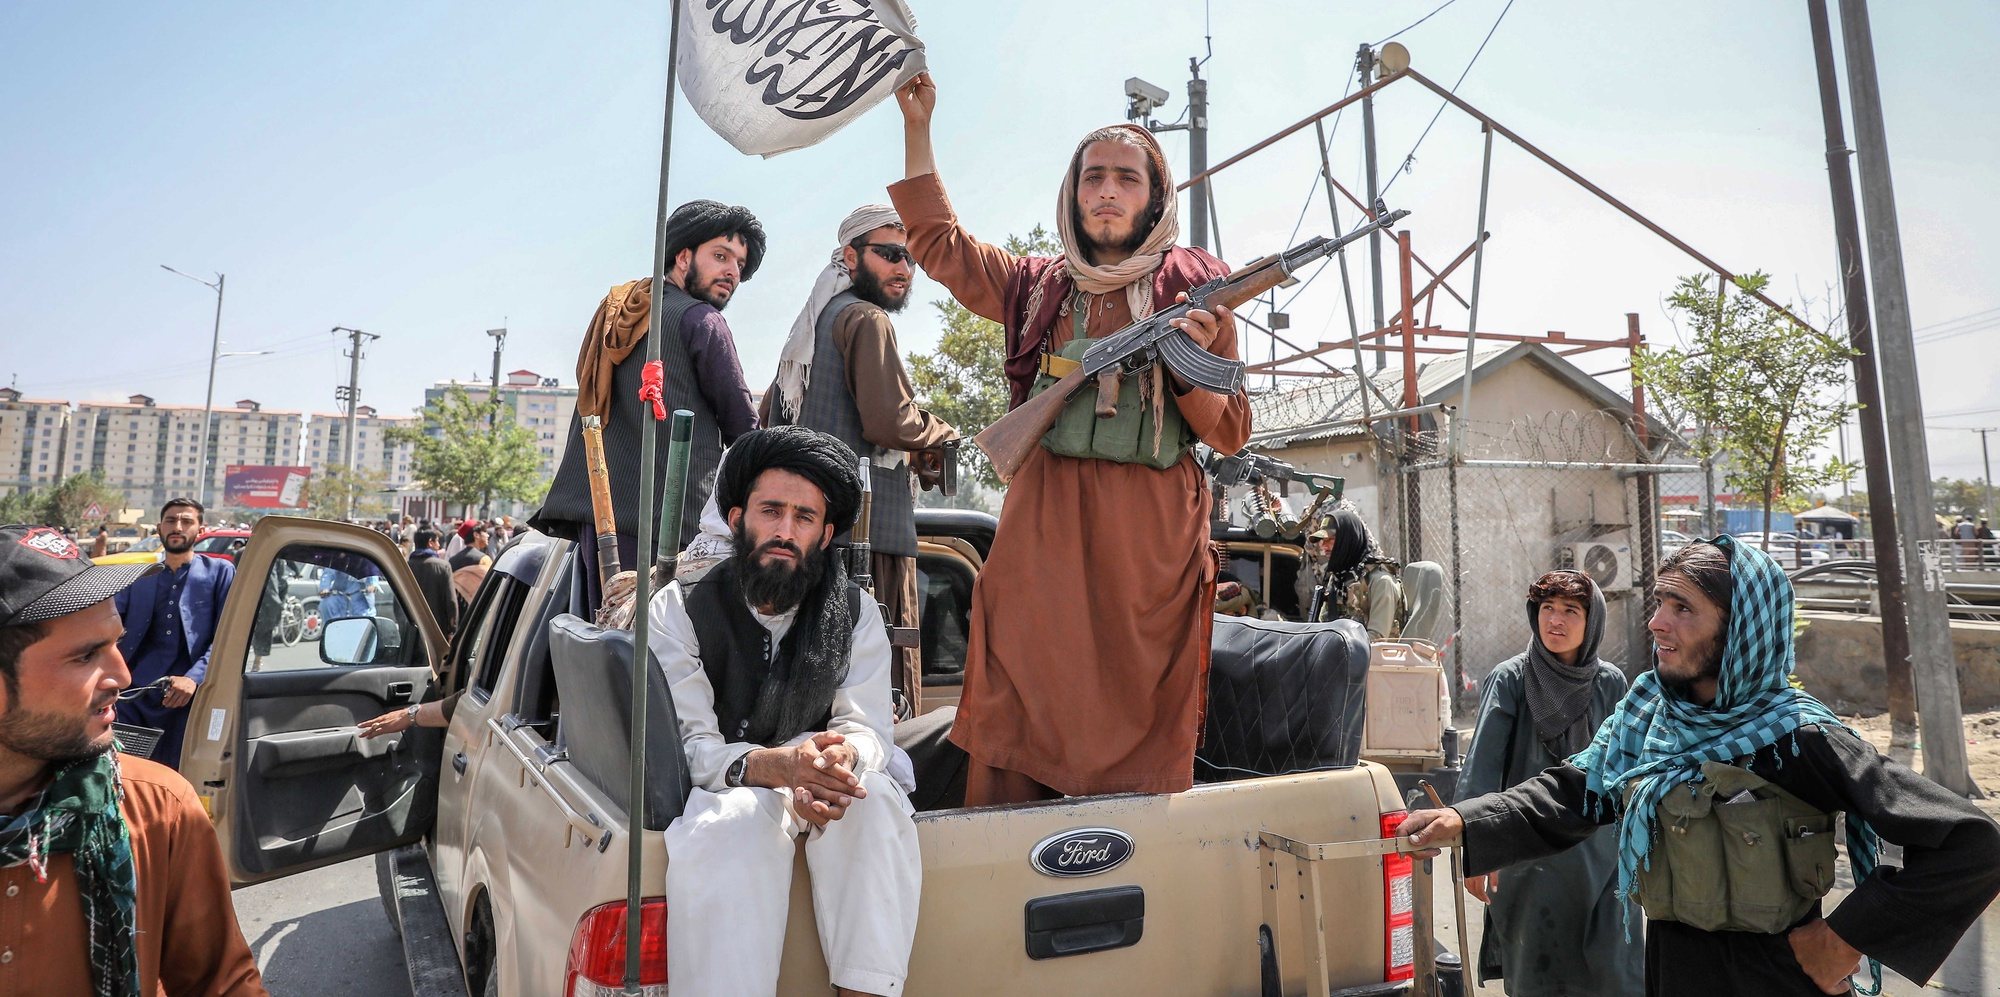 epa09416519 Taliban fighters are seen on the back of a vehicle in Kabul, Afghanistan, 16 August 2021. Taliban co-founder Abdul Ghani Baradar, on 16 August 2021, declared victory and an end to the decades-long war in Afghanistan, a day after the insurgents entered Kabul to take control of the country. Baradar, who heads the Taliban political office in Qatar, released a short video message after President Ashraf Ghani fled and conceded that the insurgents had won the 20-year war.  EPA/STRINGER